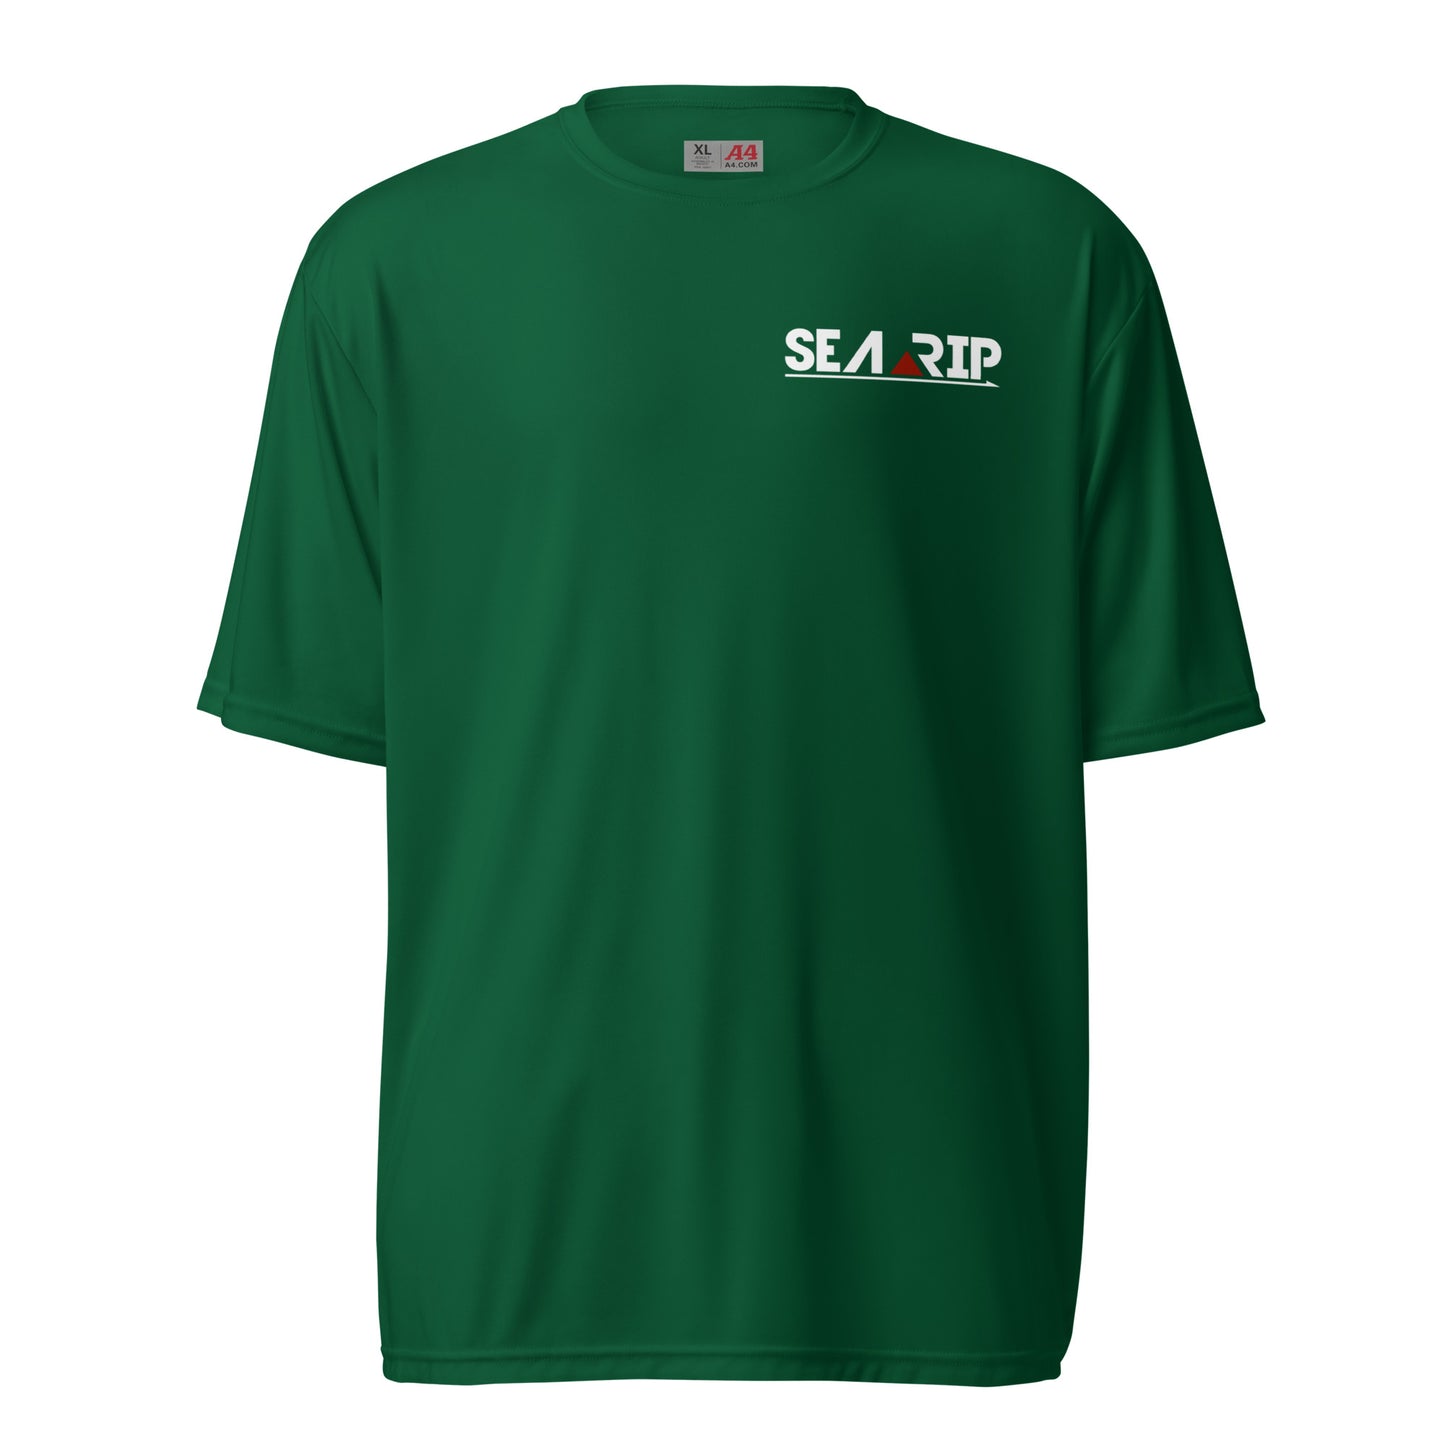 SEARIP Unisex performance crew neck t-shirt front and back logo